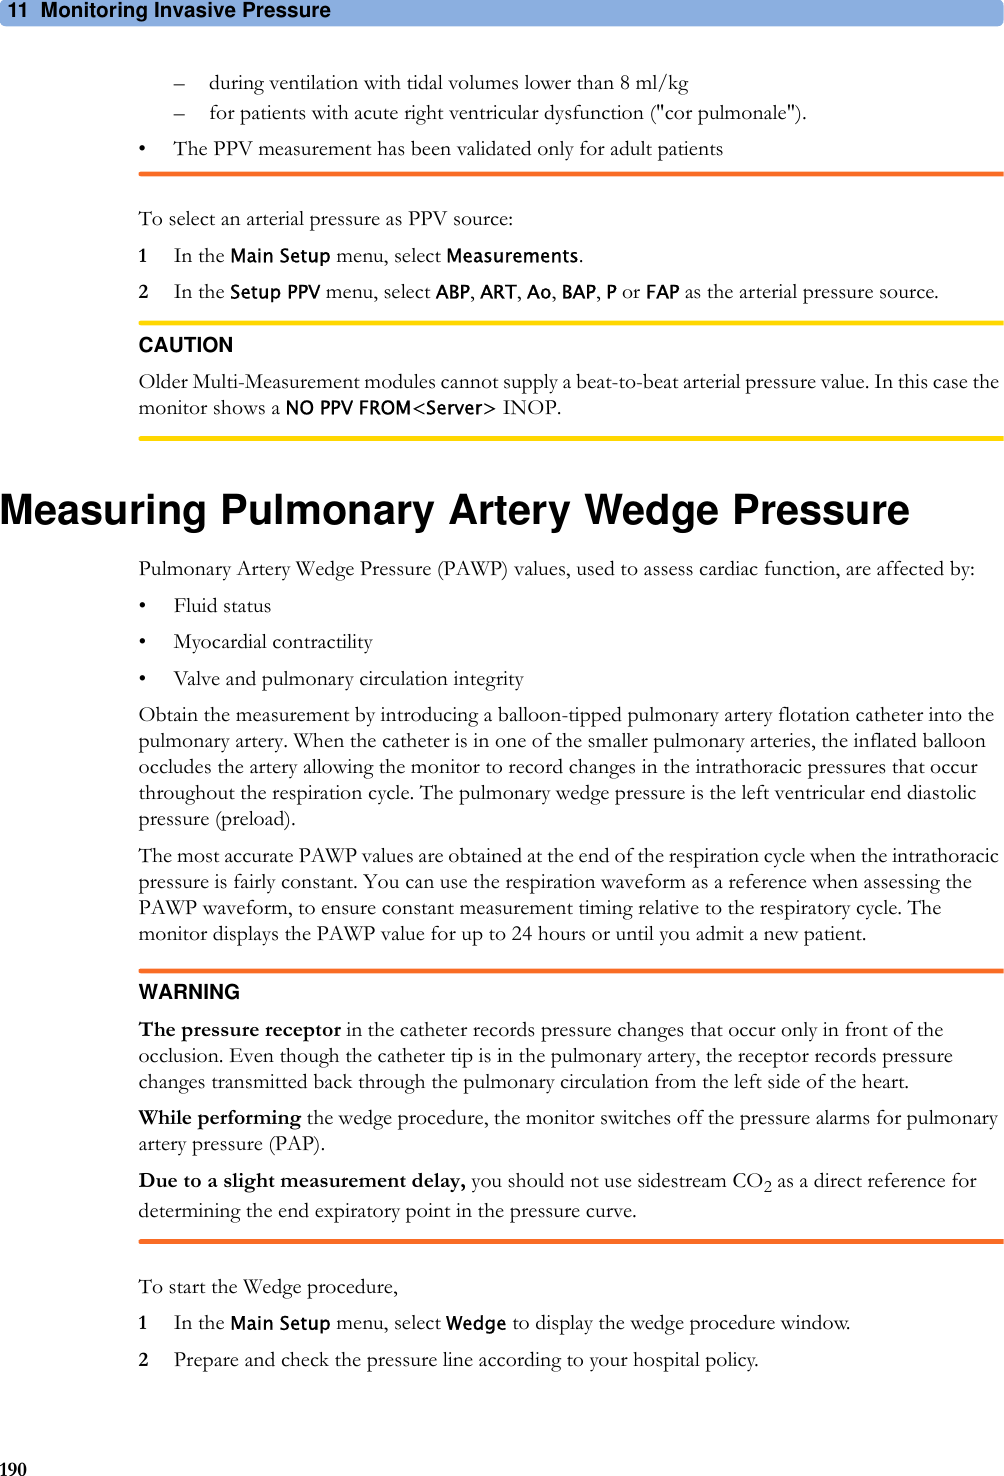 11 Monitoring Invasive Pressure190– during ventilation with tidal volumes lower than 8 ml/kg– for patients with acute right ventricular dysfunction (&quot;cor pulmonale&quot;).• The PPV measurement has been validated only for adult patientsTo select an arterial pressure as PPV source:1In the Main Setup menu, select Measurements.2In the Setup PPV menu, select ABP, ART, Ao, BAP, P or FAP as the arterial pressure source.CAUTIONOlder Multi-Measurement modules cannot supply a beat-to-beat arterial pressure value. In this case the monitor shows a NO PPV FROM&lt;Server&gt; INOP.Measuring Pulmonary Artery Wedge PressurePulmonary Artery Wedge Pressure (PAWP) values, used to assess cardiac function, are affected by:• Fluid status• Myocardial contractility• Valve and pulmonary circulation integrityObtain the measurement by introducing a balloon-tipped pulmonary artery flotation catheter into the pulmonary artery. When the catheter is in one of the smaller pulmonary arteries, the inflated balloon occludes the artery allowing the monitor to record changes in the intrathoracic pressures that occur throughout the respiration cycle. The pulmonary wedge pressure is the left ventricular end diastolic pressure (preload).The most accurate PAWP values are obtained at the end of the respiration cycle when the intrathoracic pressure is fairly constant. You can use the respiration waveform as a reference when assessing the PAWP waveform, to ensure constant measurement timing relative to the respiratory cycle. The monitor displays the PAWP value for up to 24 hours or until you admit a new patient.WARNINGThe pressure receptor in the catheter records pressure changes that occur only in front of the occlusion. Even though the catheter tip is in the pulmonary artery, the receptor records pressure changes transmitted back through the pulmonary circulation from the left side of the heart.While performing the wedge procedure, the monitor switches off the pressure alarms for pulmonary artery pressure (PAP).Due to a slight measurement delay, you should not use sidestream CO2 as a direct reference for determining the end expiratory point in the pressure curve.To start the Wedge procedure,1In the Main Setup menu, select Wedge to display the wedge procedure window.2Prepare and check the pressure line according to your hospital policy.